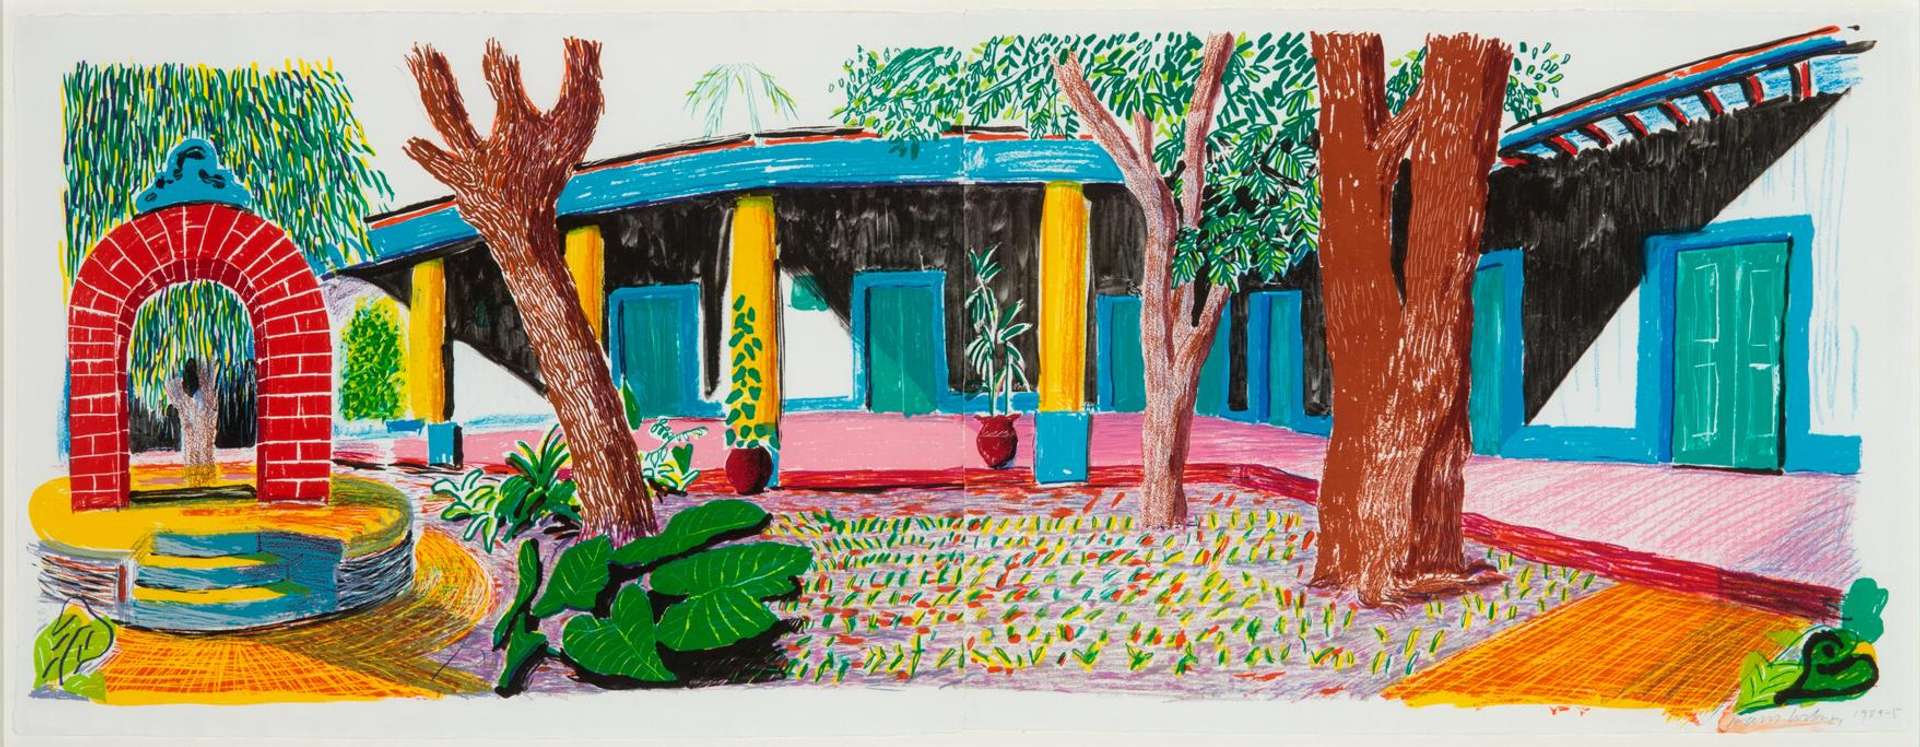 David Hockney's Hotel Acatlán: Second Day. A lithographic print of the courtyard exterior of Hotel Acatlán